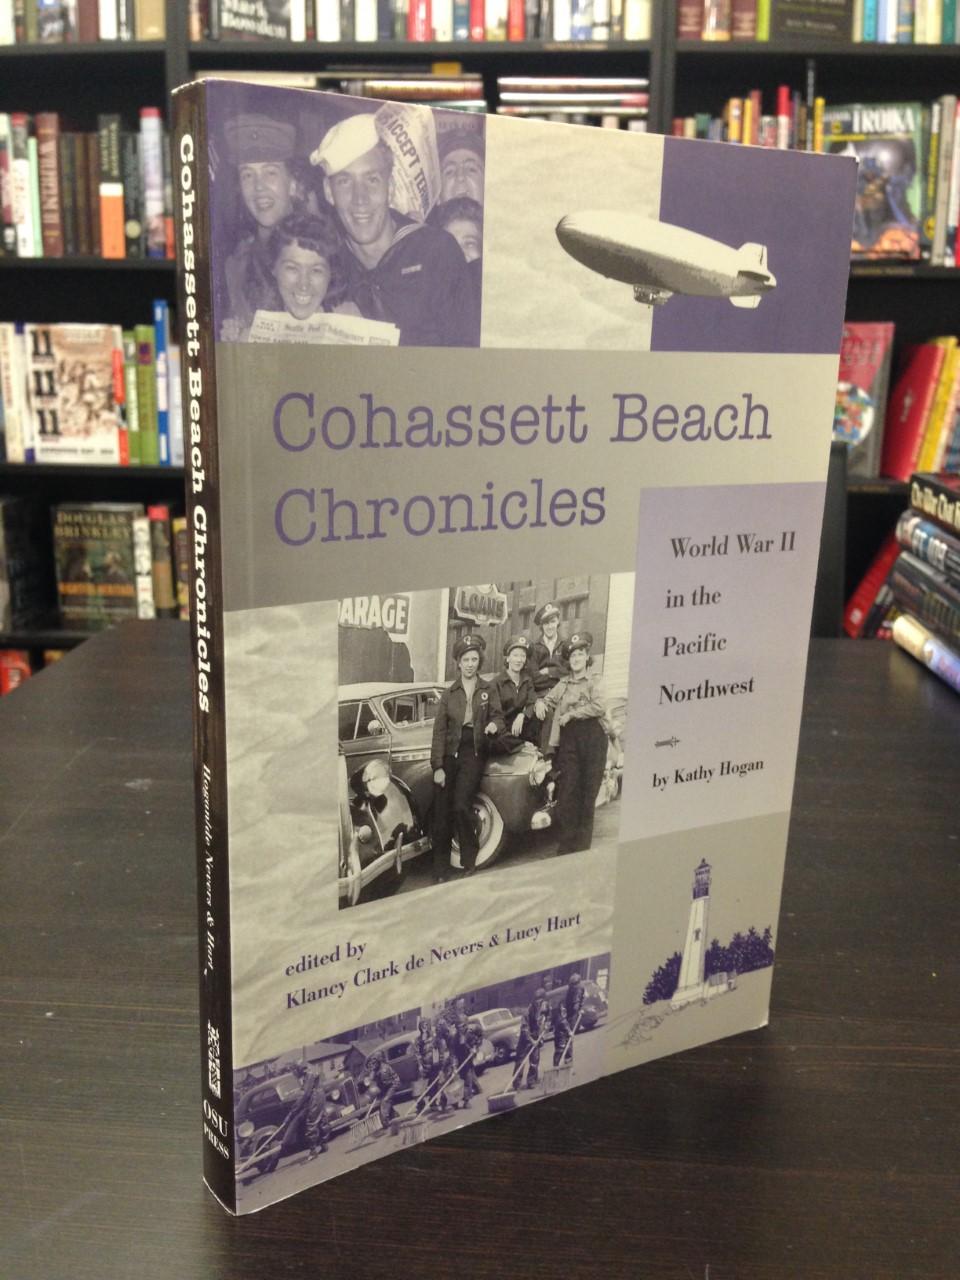 Cohassett Beach Chronicles: World War II in the Pacific Northwest - Hogan, Kathy (Edited By Klancy Clark de Nevers and Lucy Hart)